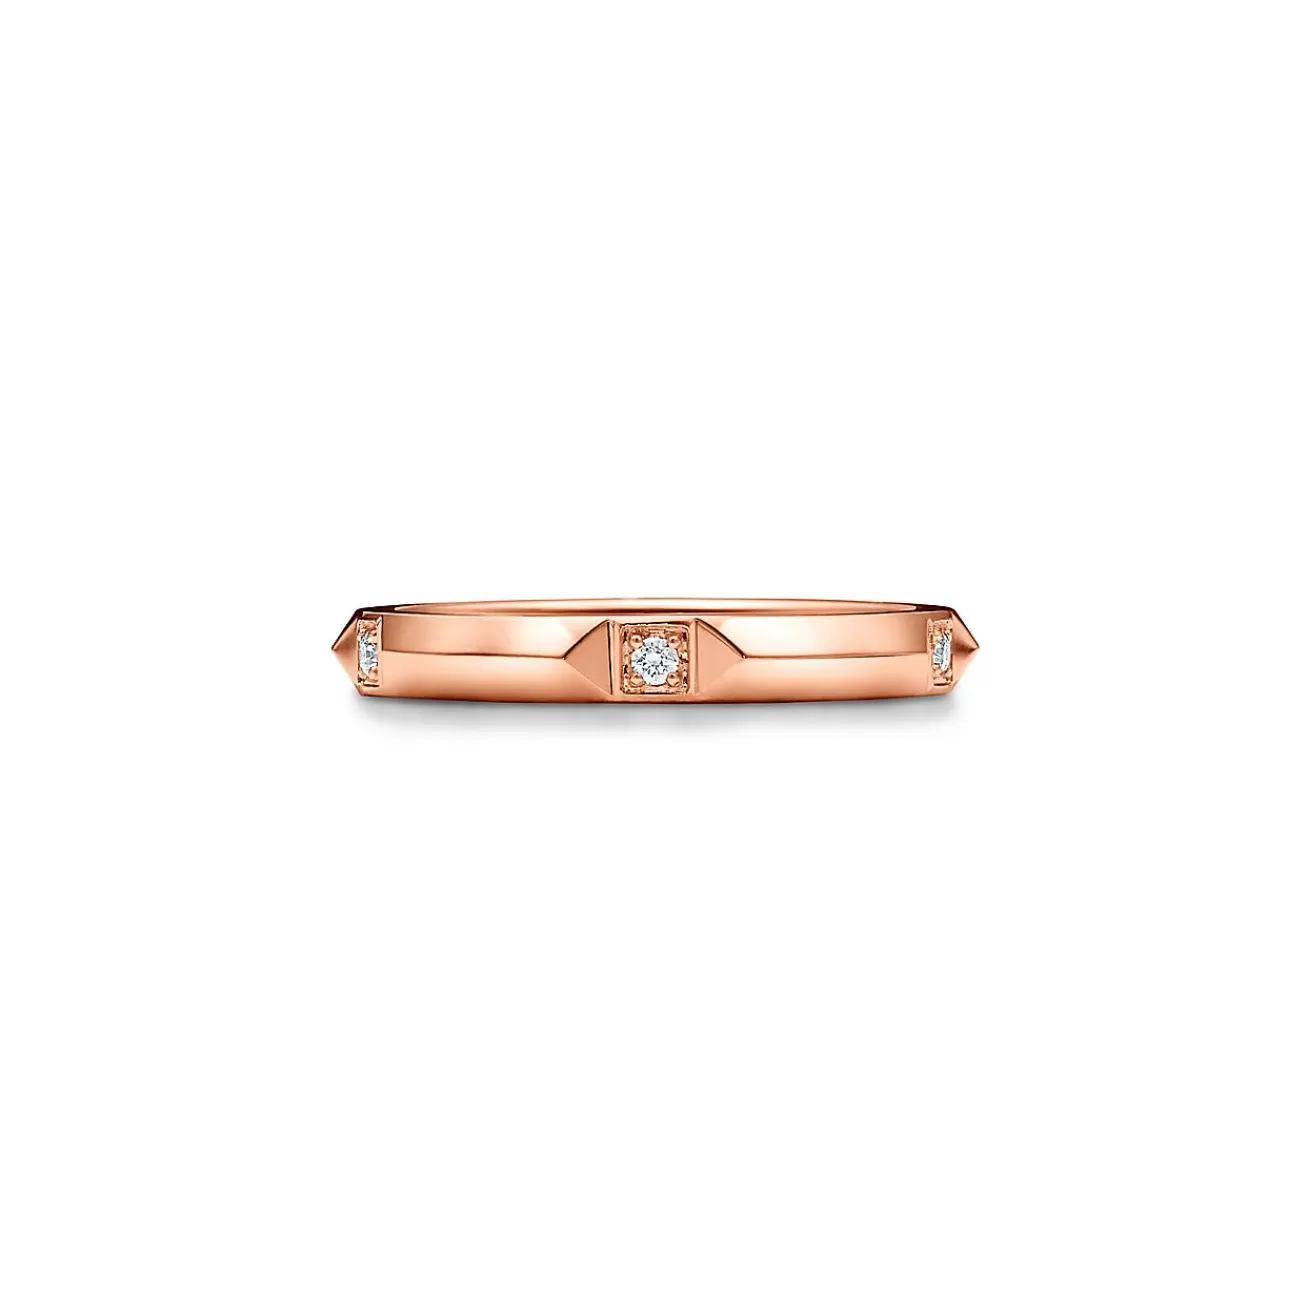 Tiffany & Co. Tiffany True® band ring in 18k rose gold with diamonds, 2.5 mm wide. | ^Women Rings | Men's Jewelry